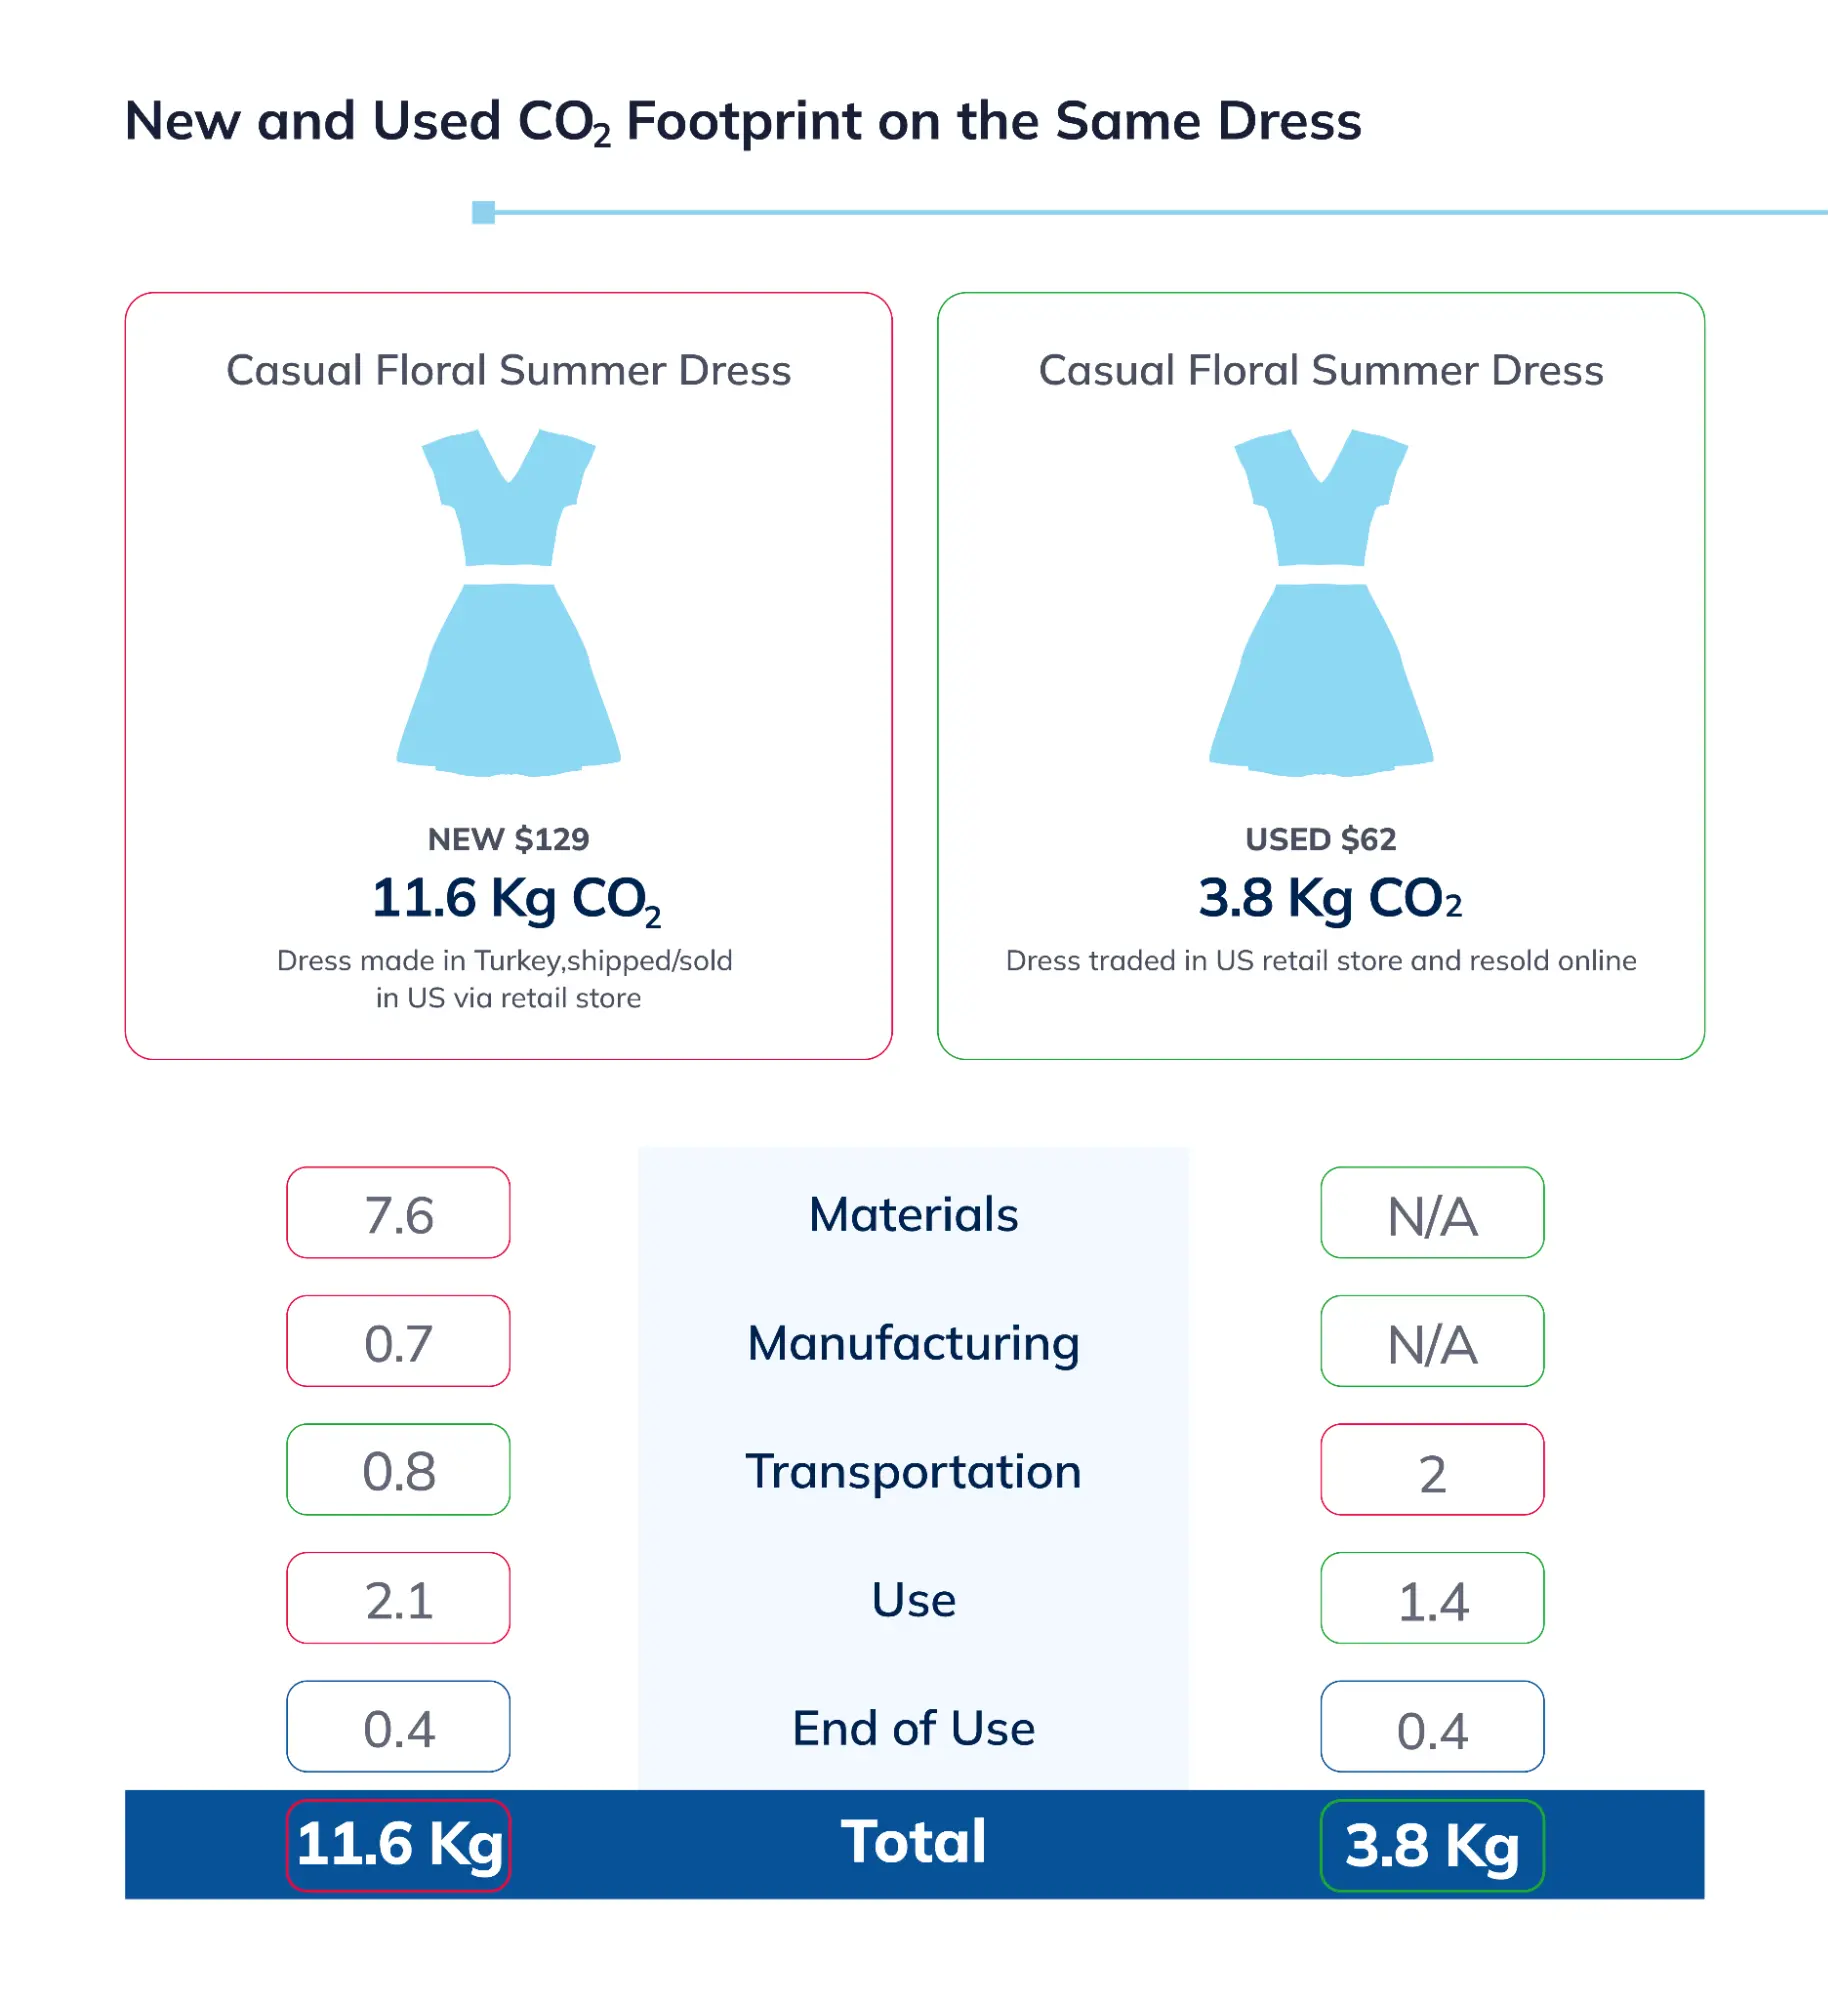 Carbon dioxide footprint of the same new and used dress